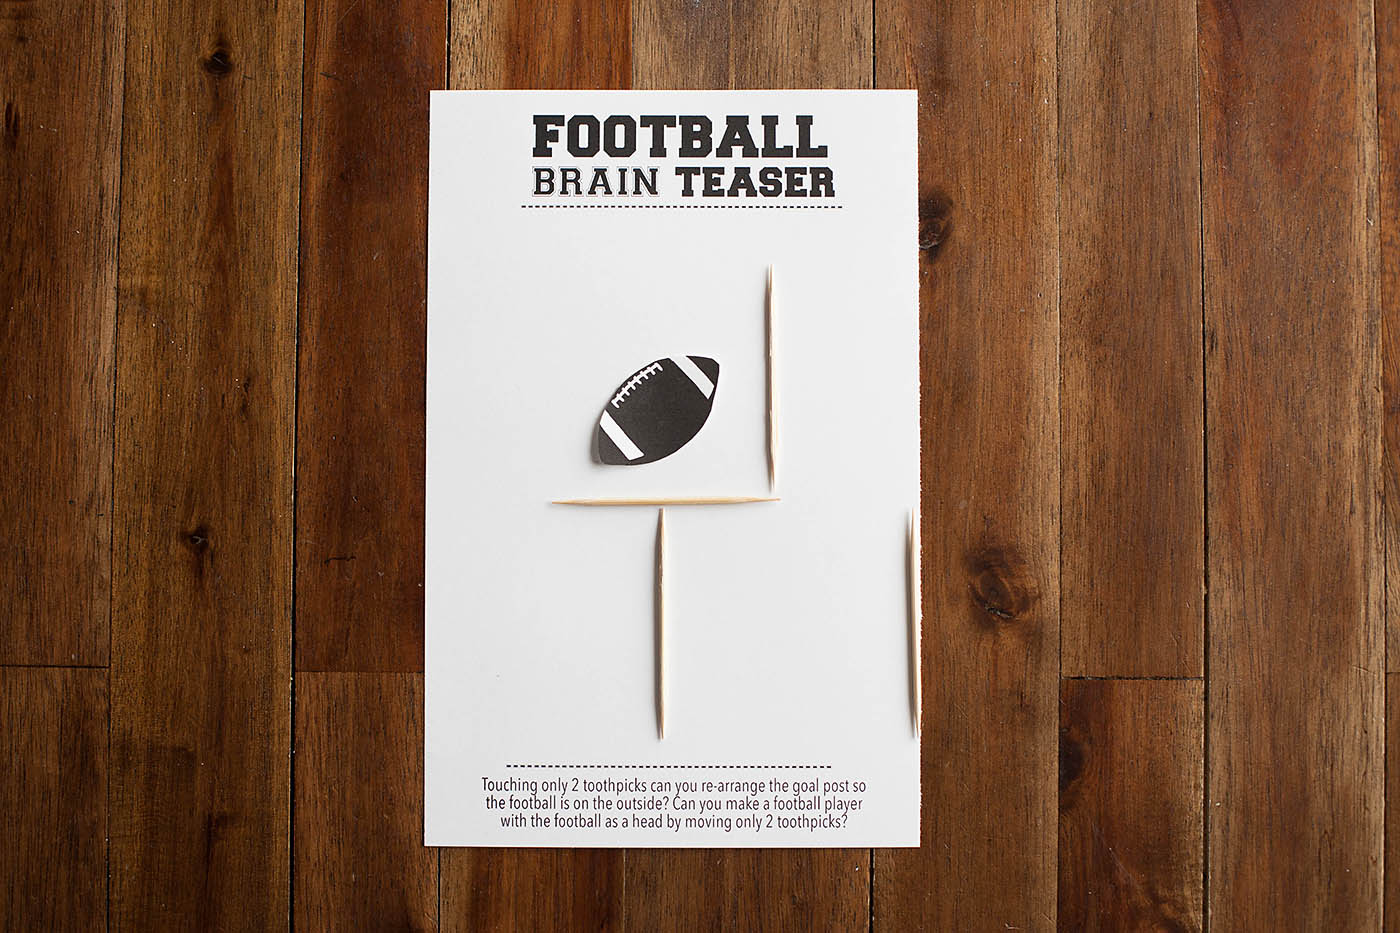 Printable football brain teaser - perfect for a Super Bowl or football party!